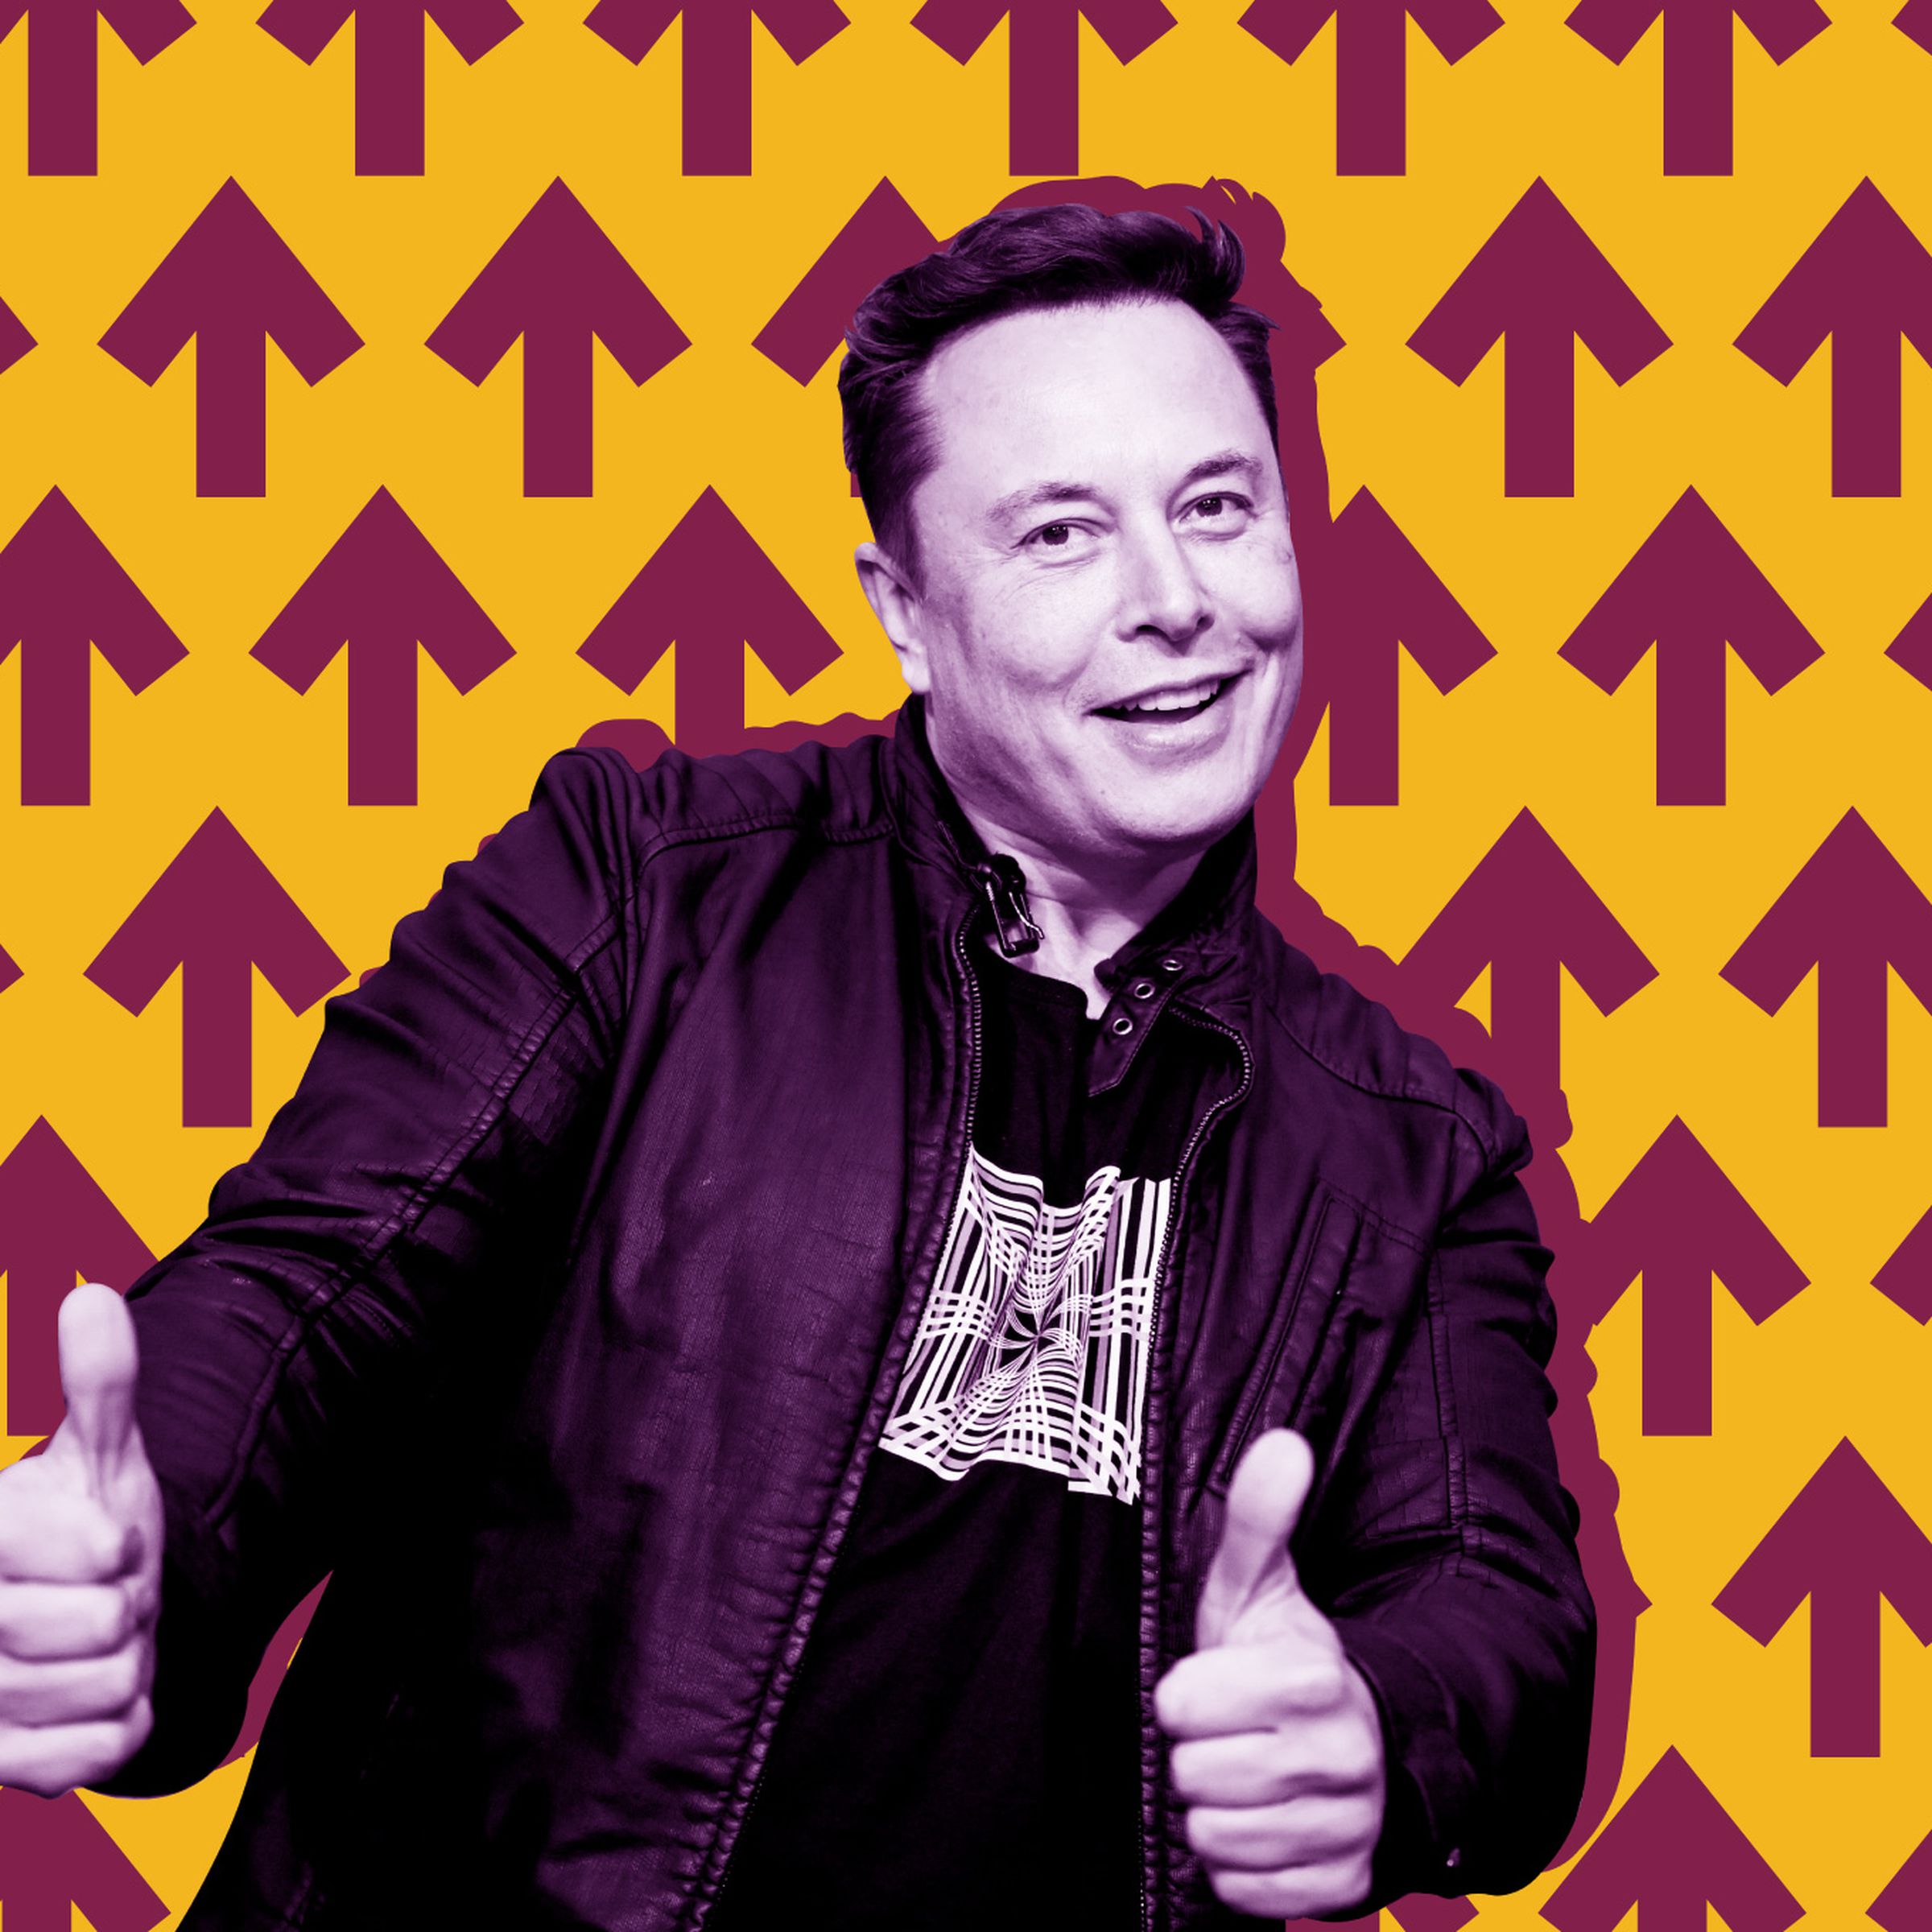 A photo illustration of Elon Musk making a thumbs-up gesture against a background of arrows pointing up.